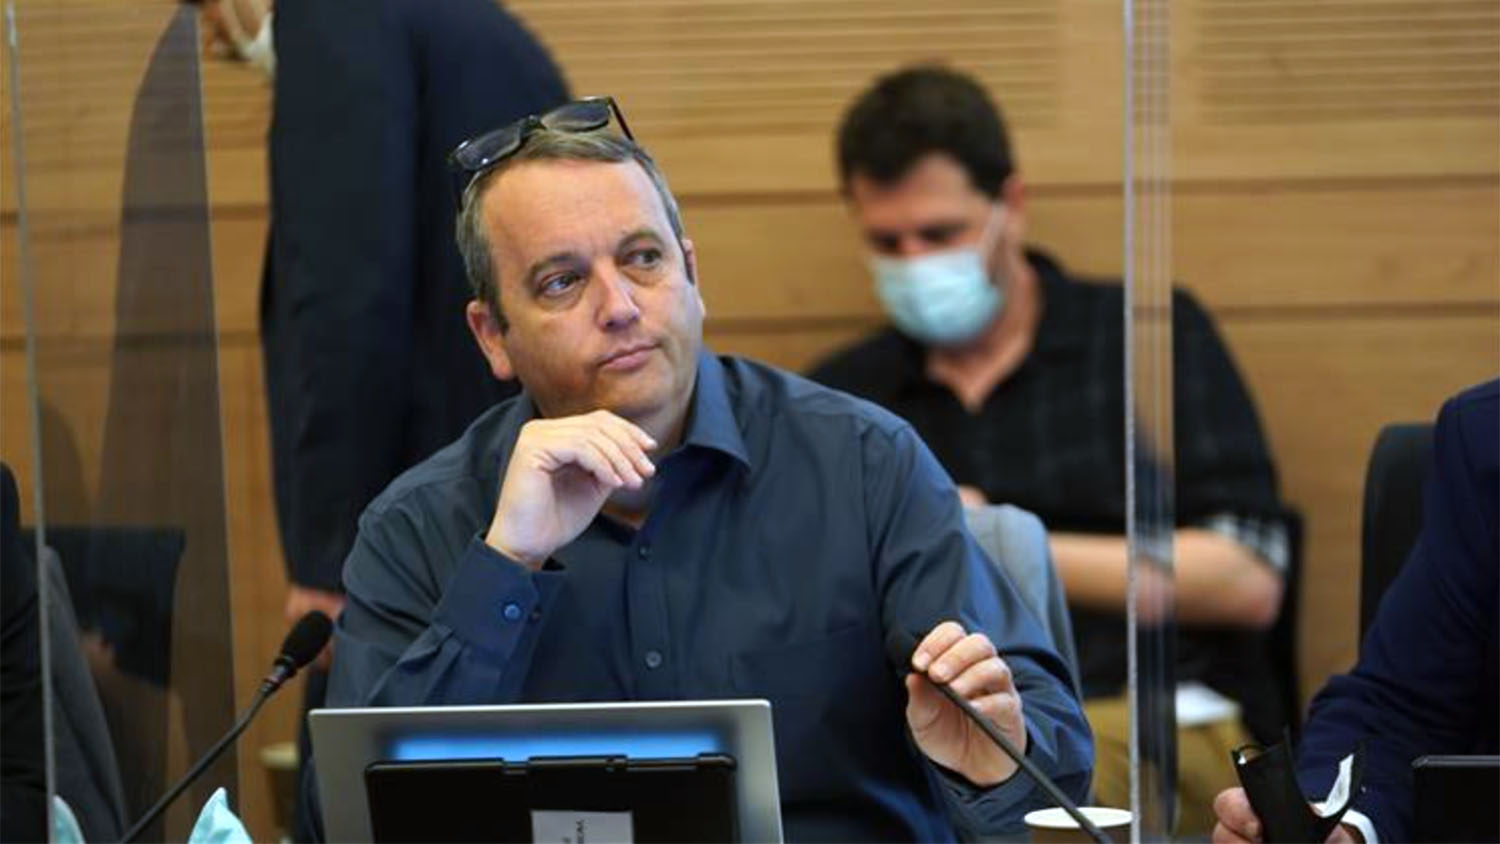 Knesset member Gilad Karib meets with the Finance Committee on May 3, 2021. Photo by Dani Shem-Tov, Knesset Spokesperson’s Office